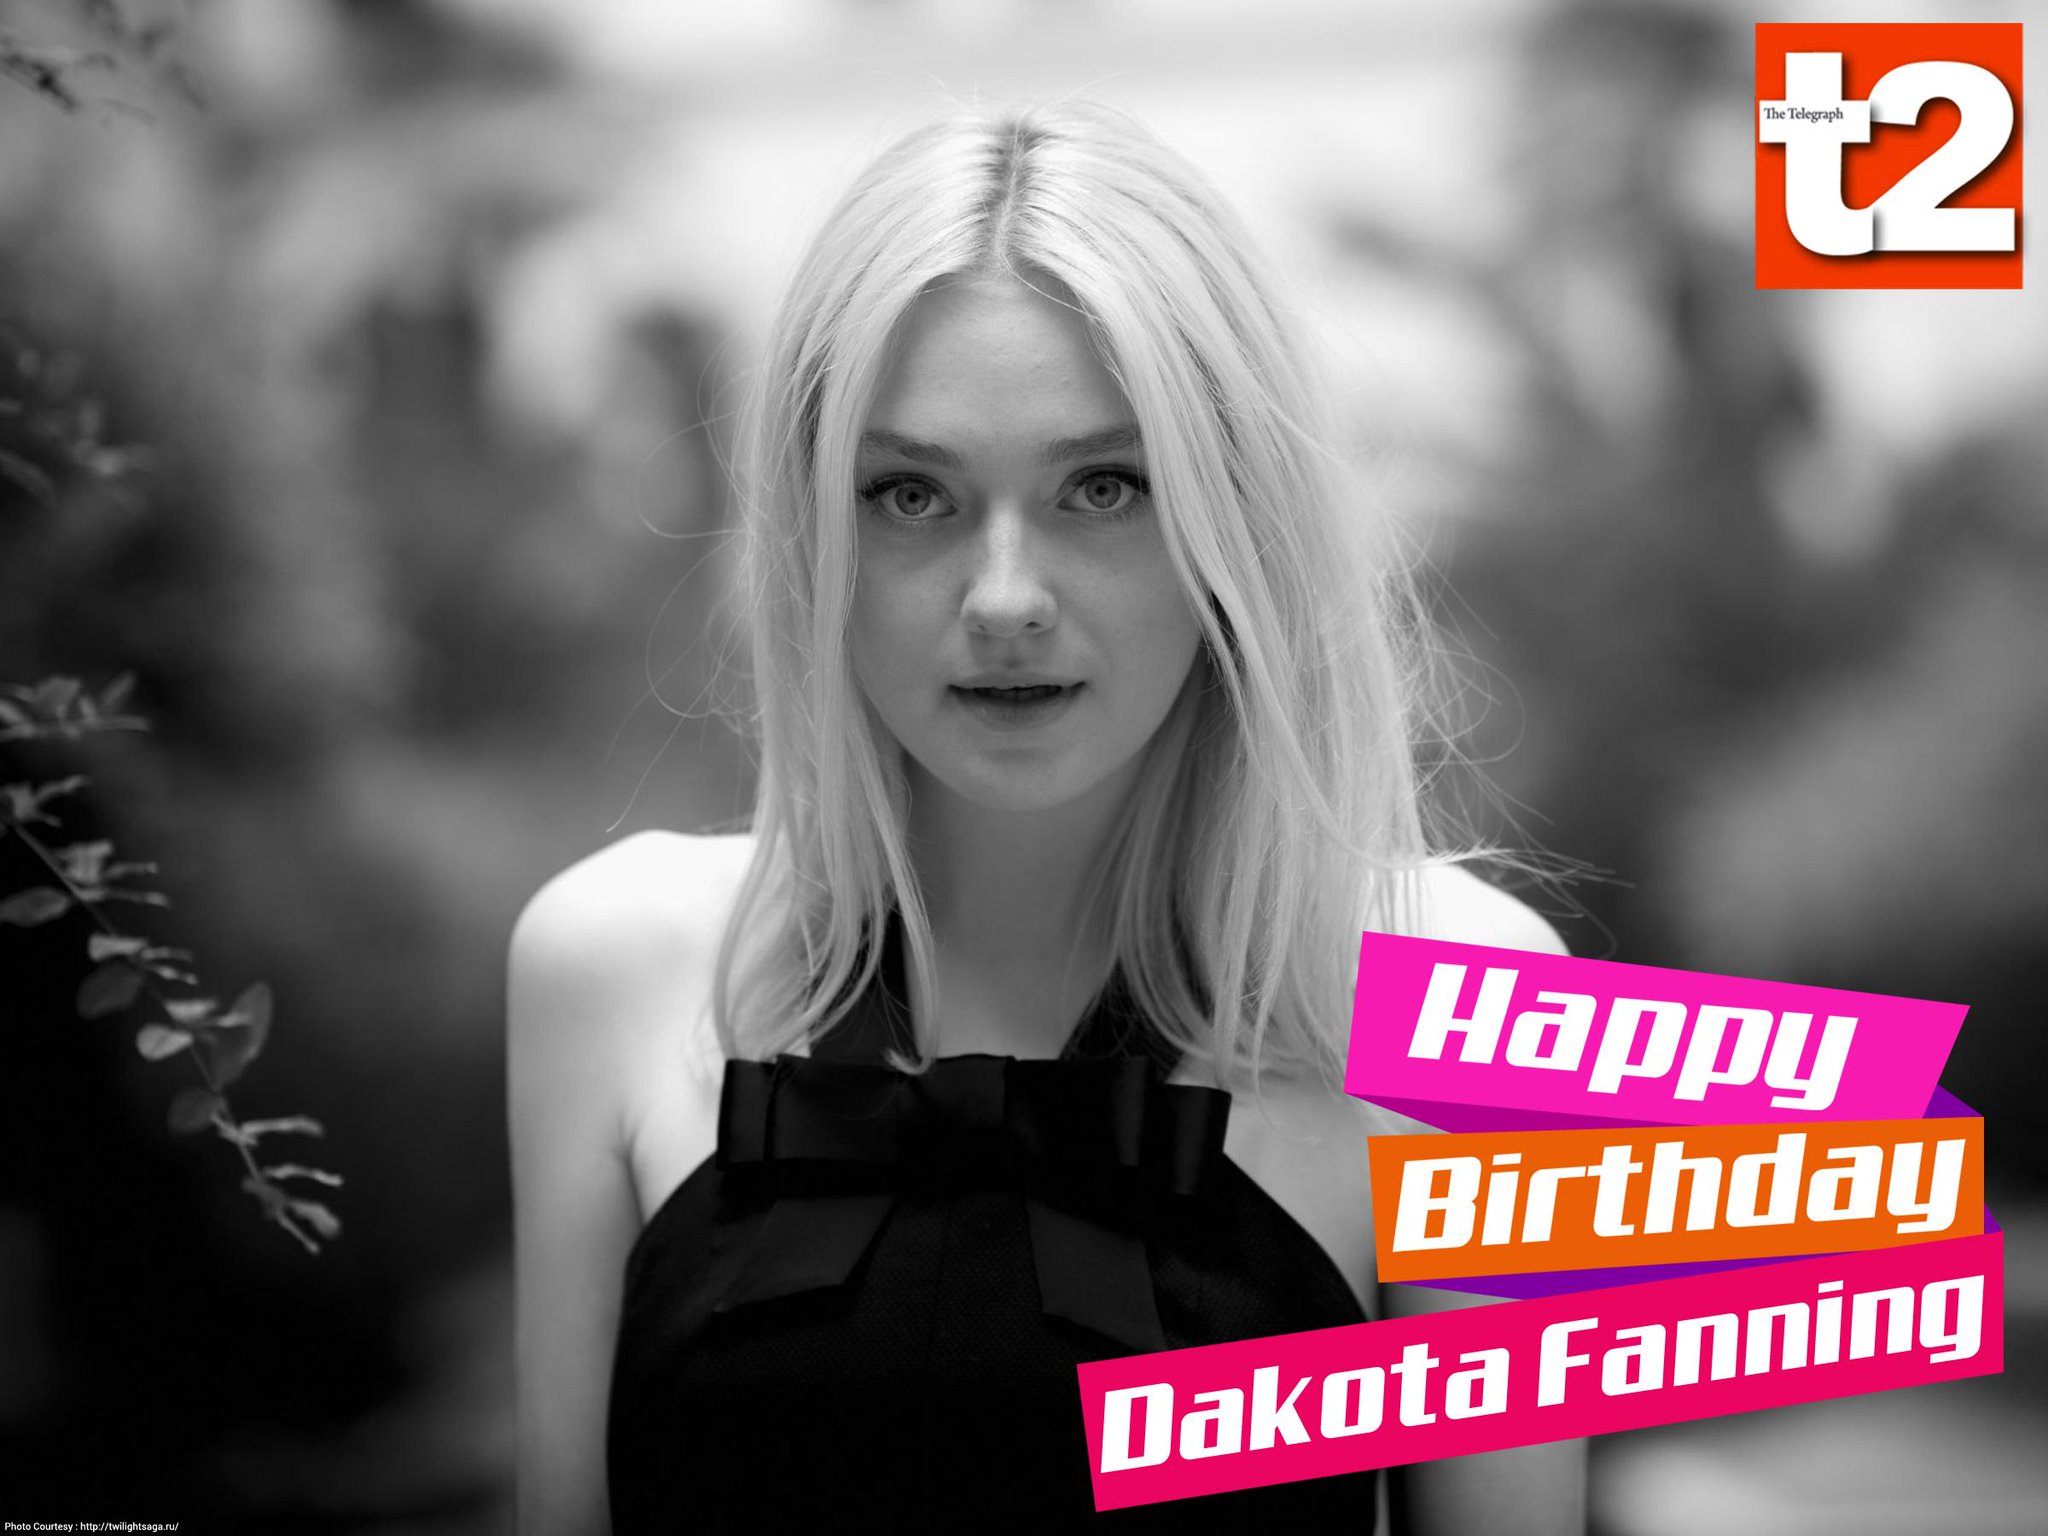 A girl after our own hearts!
Happy Birthday Dakota Fanning! 